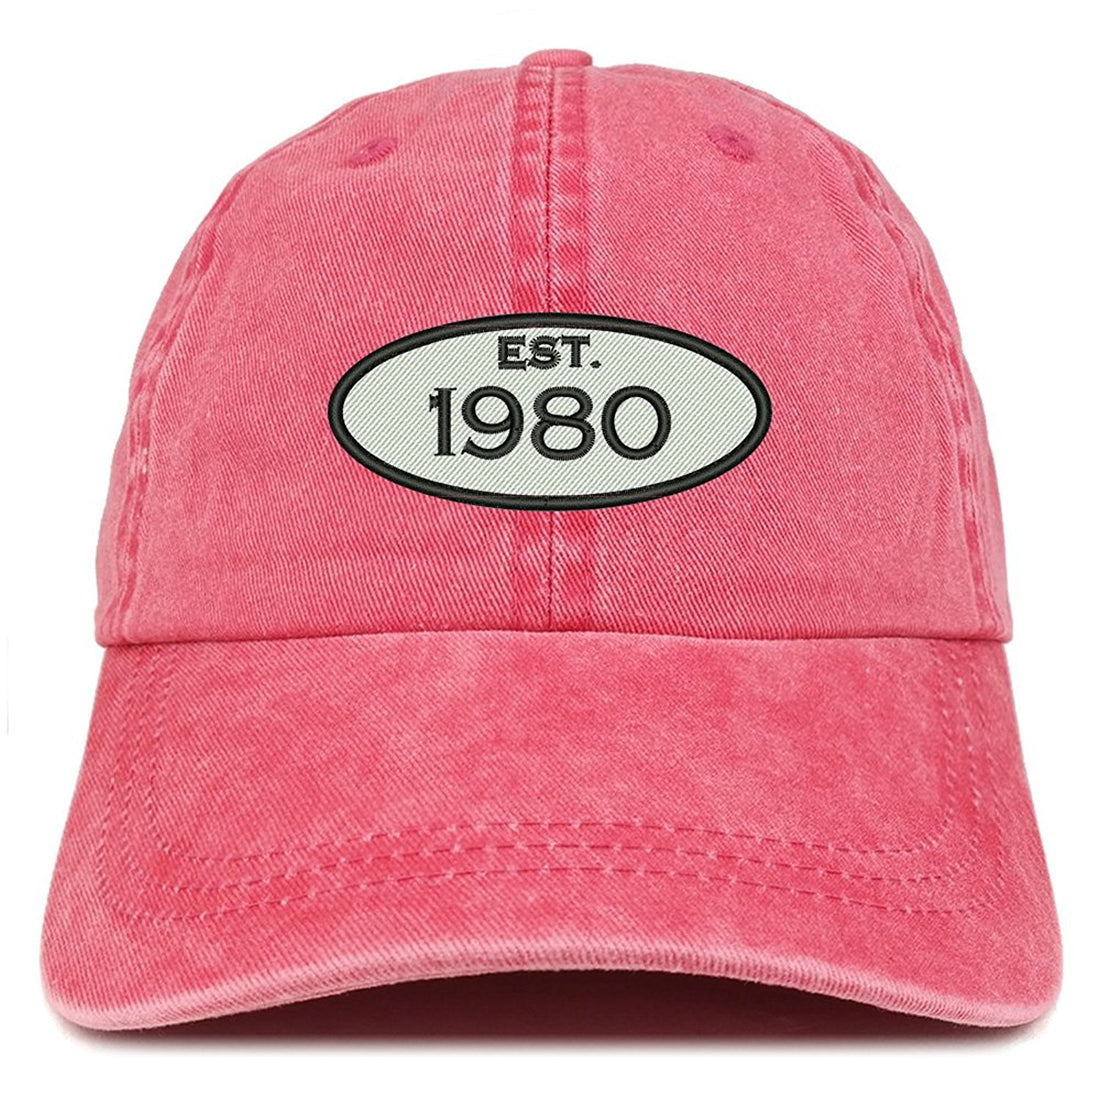 Trendy Apparel Shop Established 1980 Embroidered 39th Birthday Gift Pigment Dyed Washed Cotton Cap